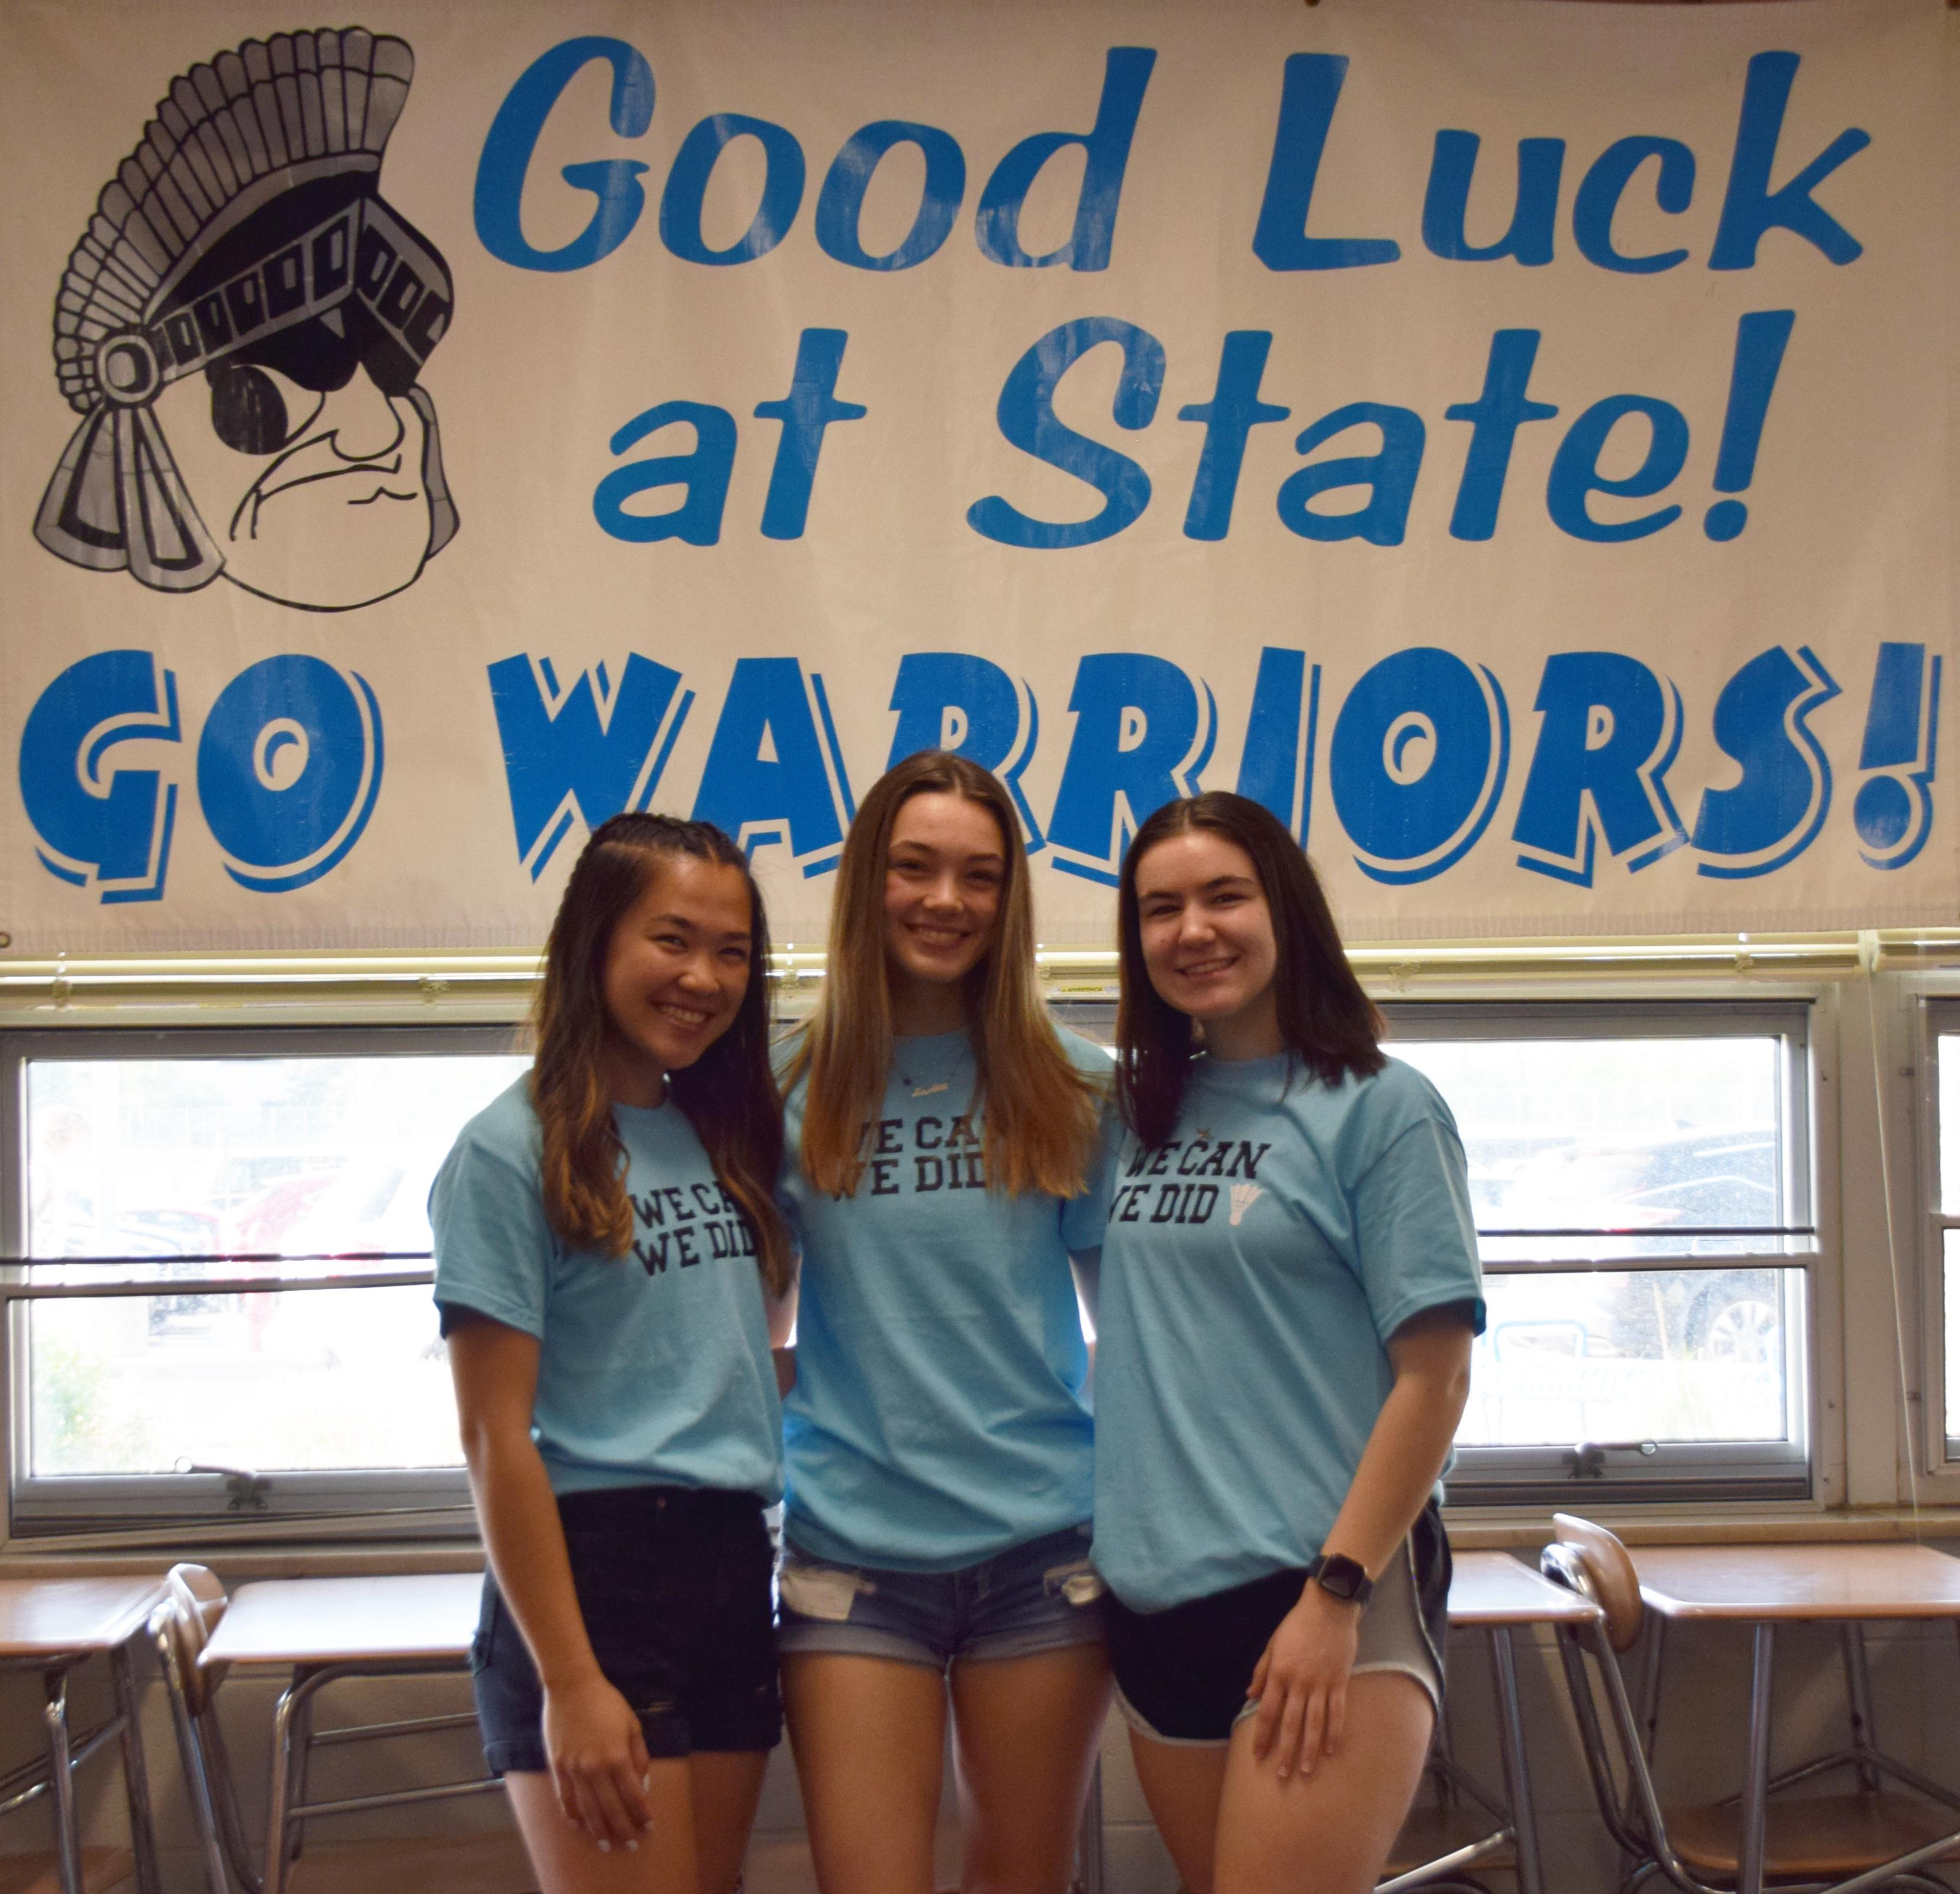 Willowbrook hosts State send-off celebration for members of Girls Badminton Team